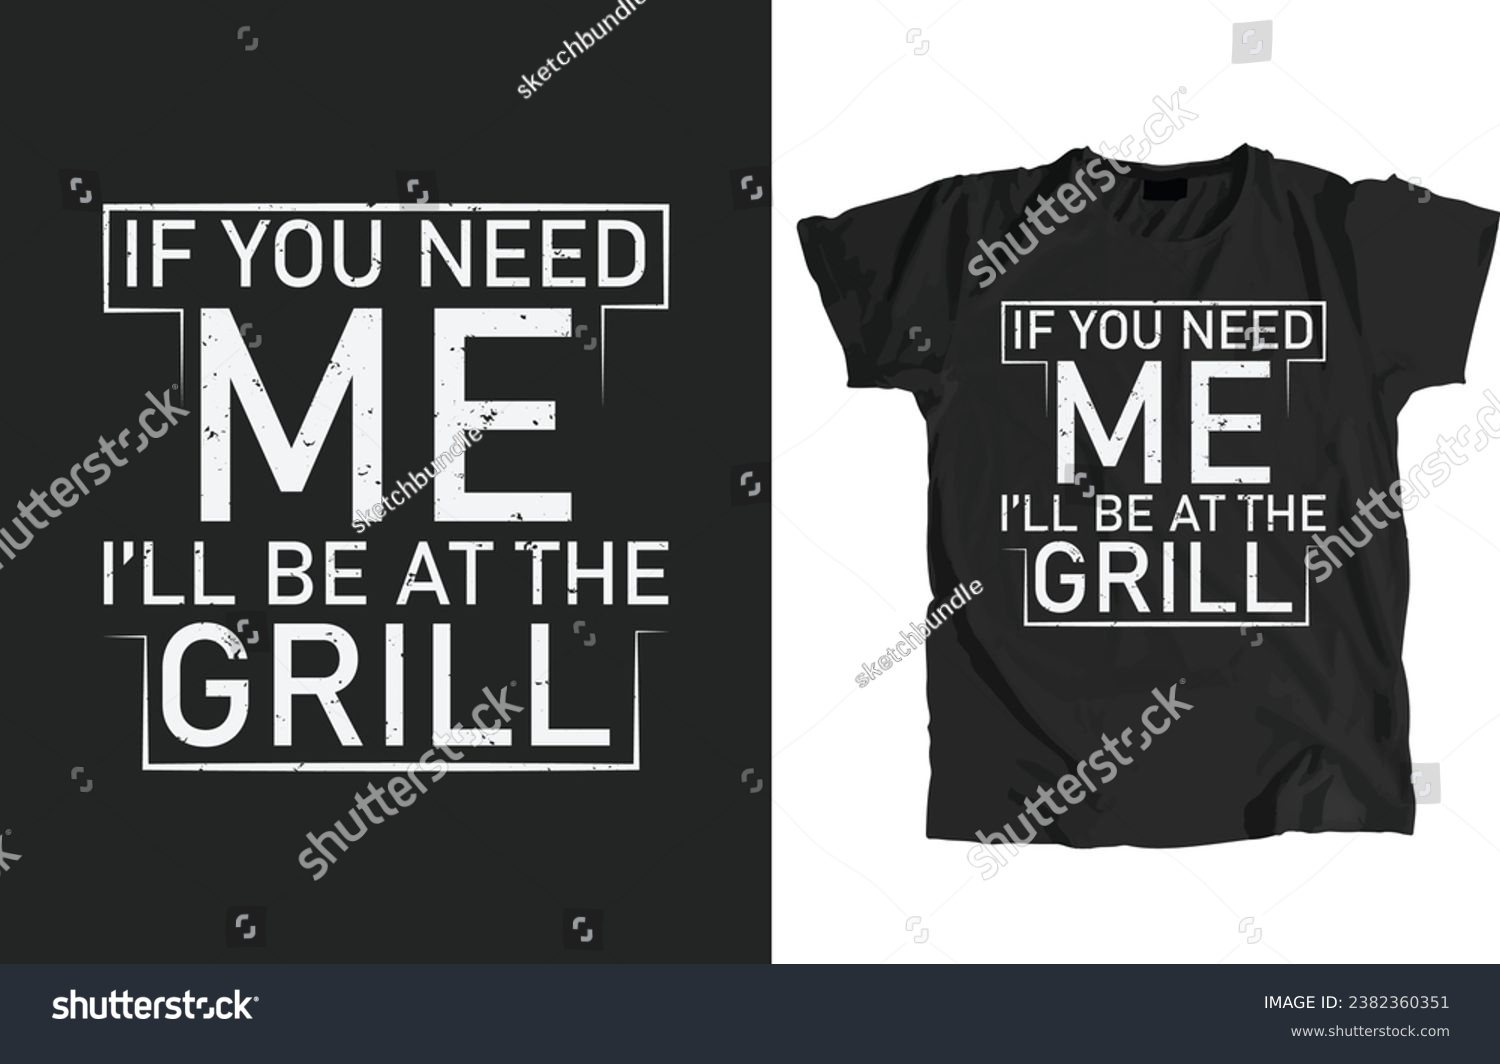 SVG of BBQ Grill Design File. That allow to print instantly Or Edit to customize for your items such as t-shirt, Hoodie, Mug, Pillow, Decal, Phone Case, Tote Bag, Mobile Popsocket etc. svg